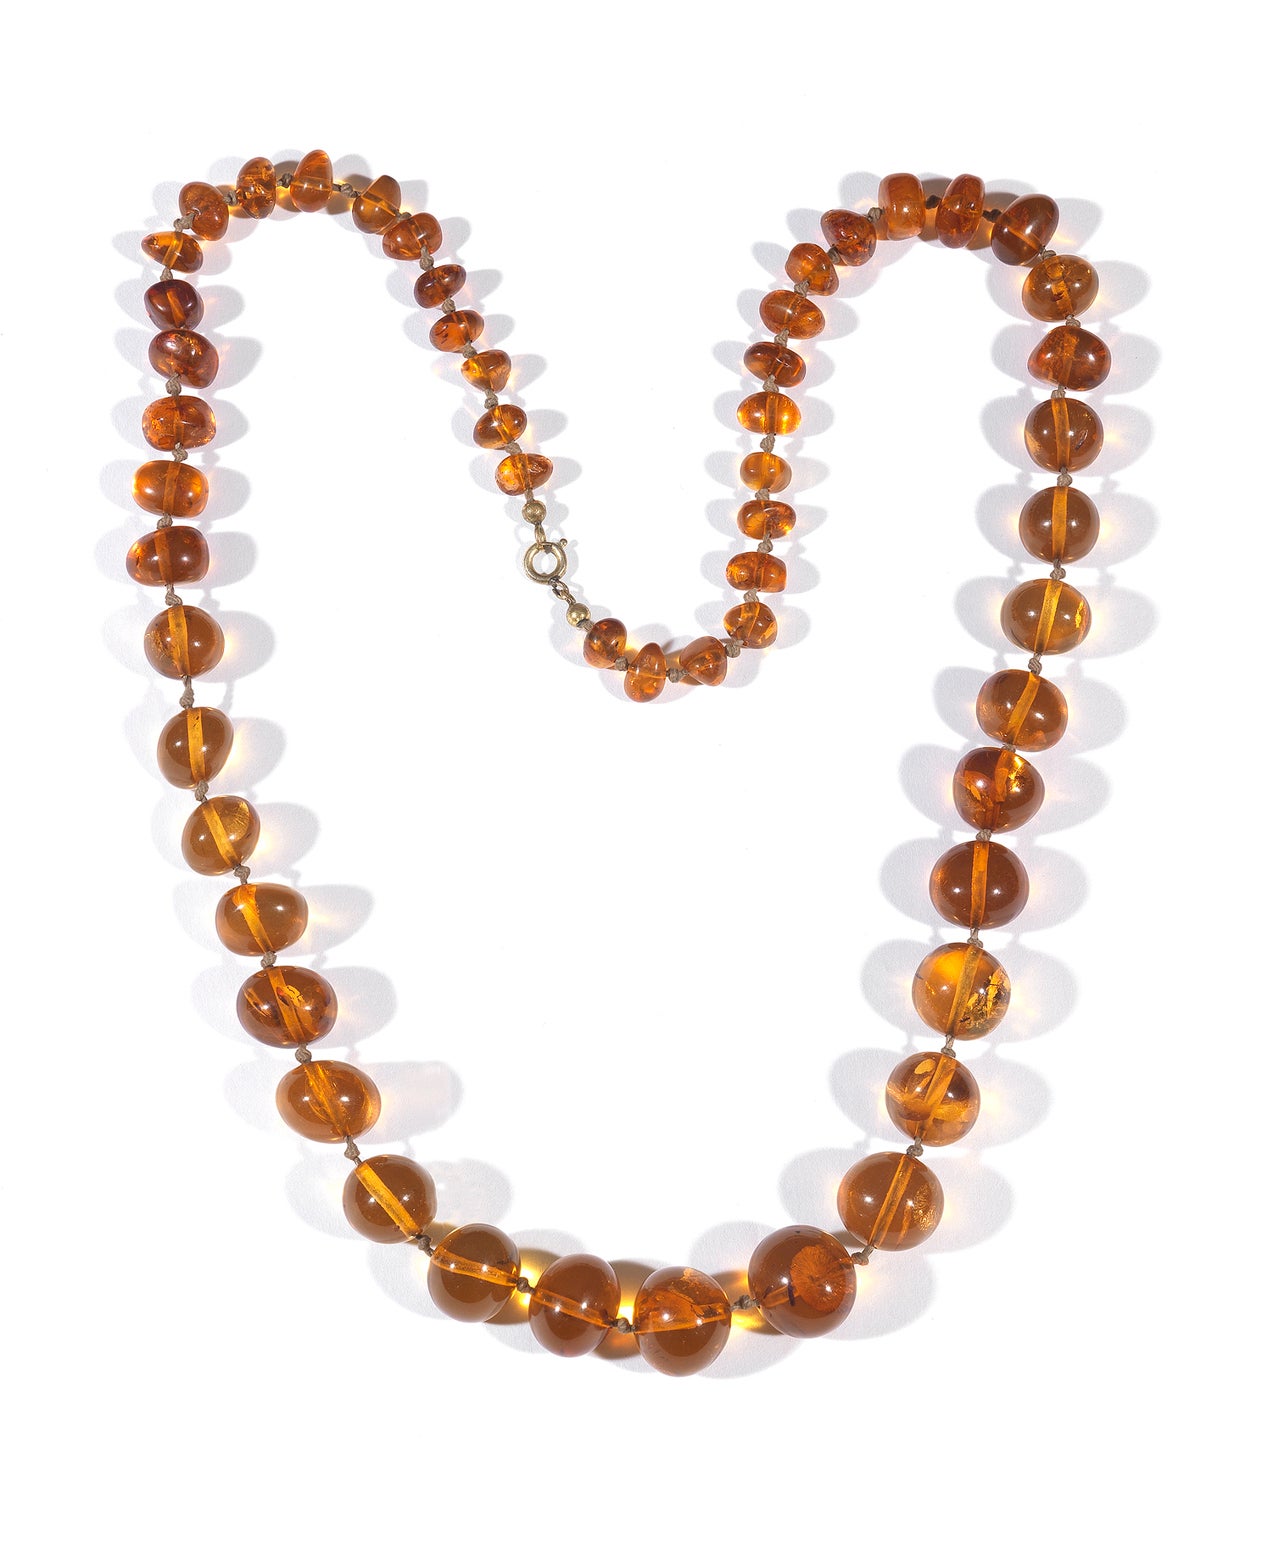 SHIPPING POLICY:
No additional costs will be added to this order.
Shipping costs will be totally covered by the seller (customs duties included). 

Composed of a continuous single strand of graduated round and oval amber beads, ranging from 8 mm to